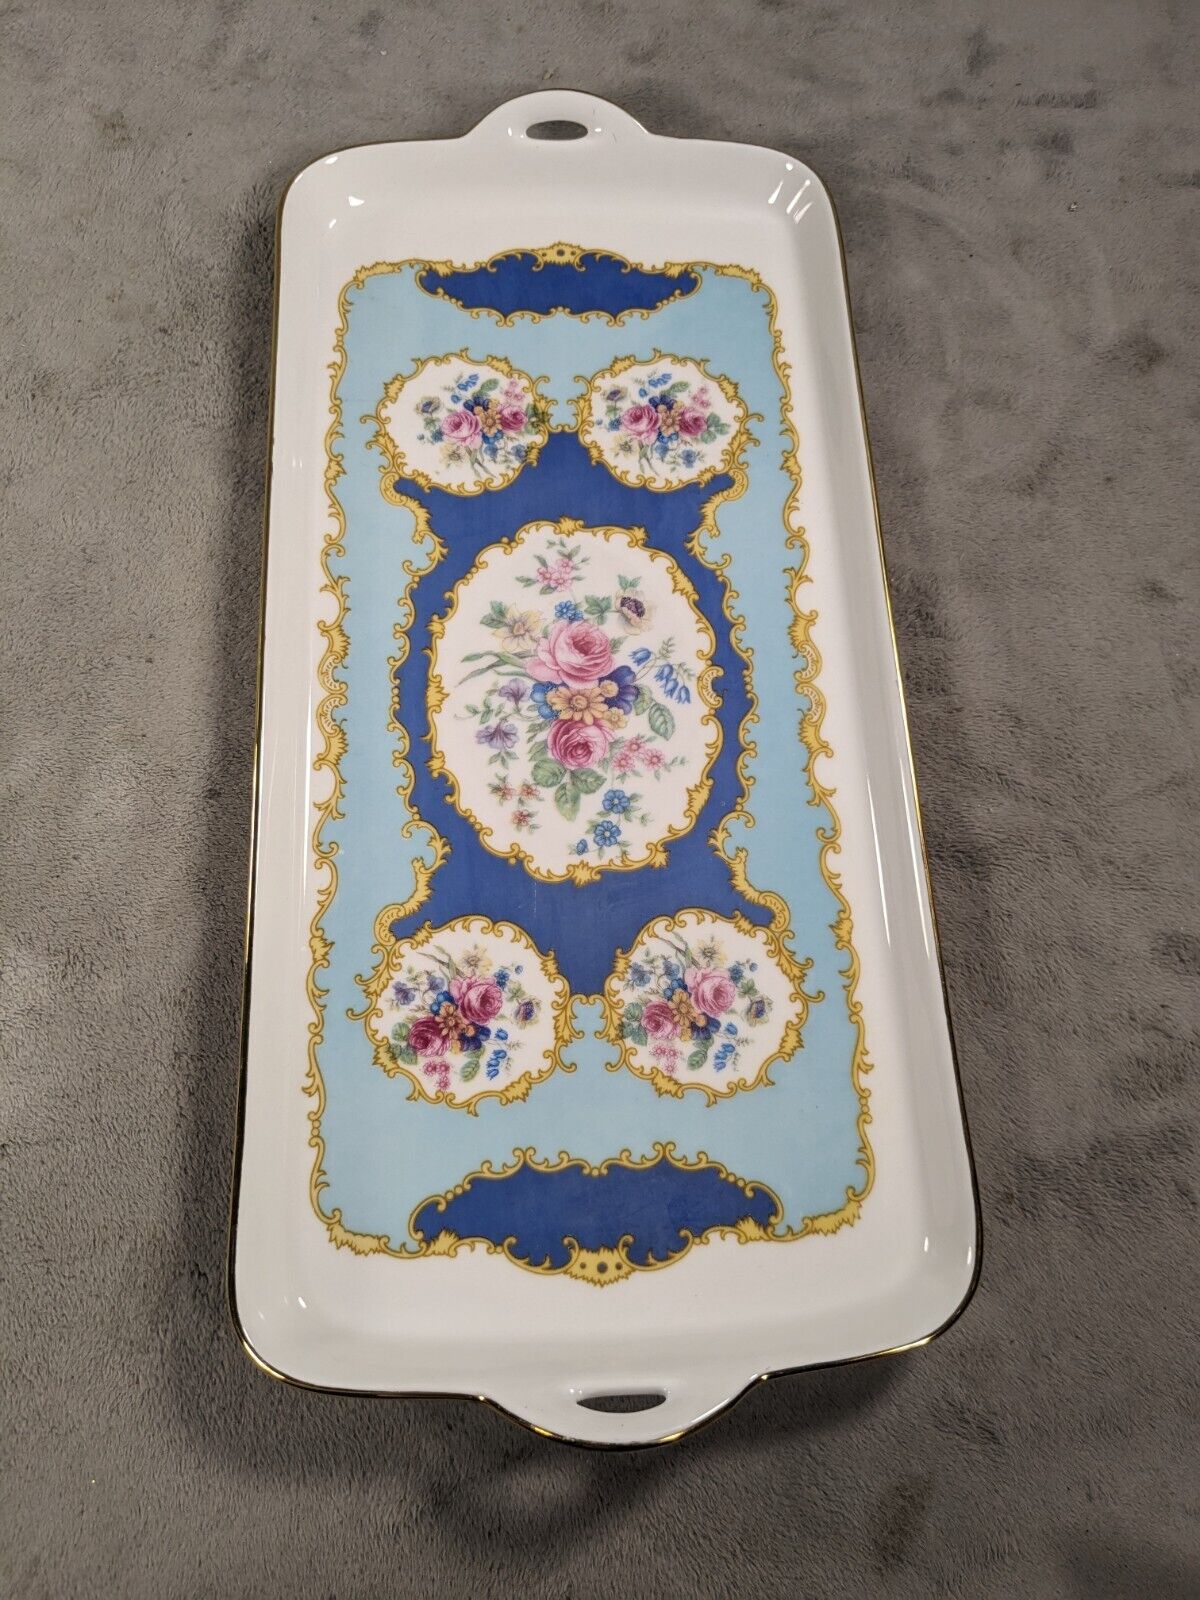 Otco Italy Marked Porcelain Presentation Long Tray Plate With Floral Pattern 14